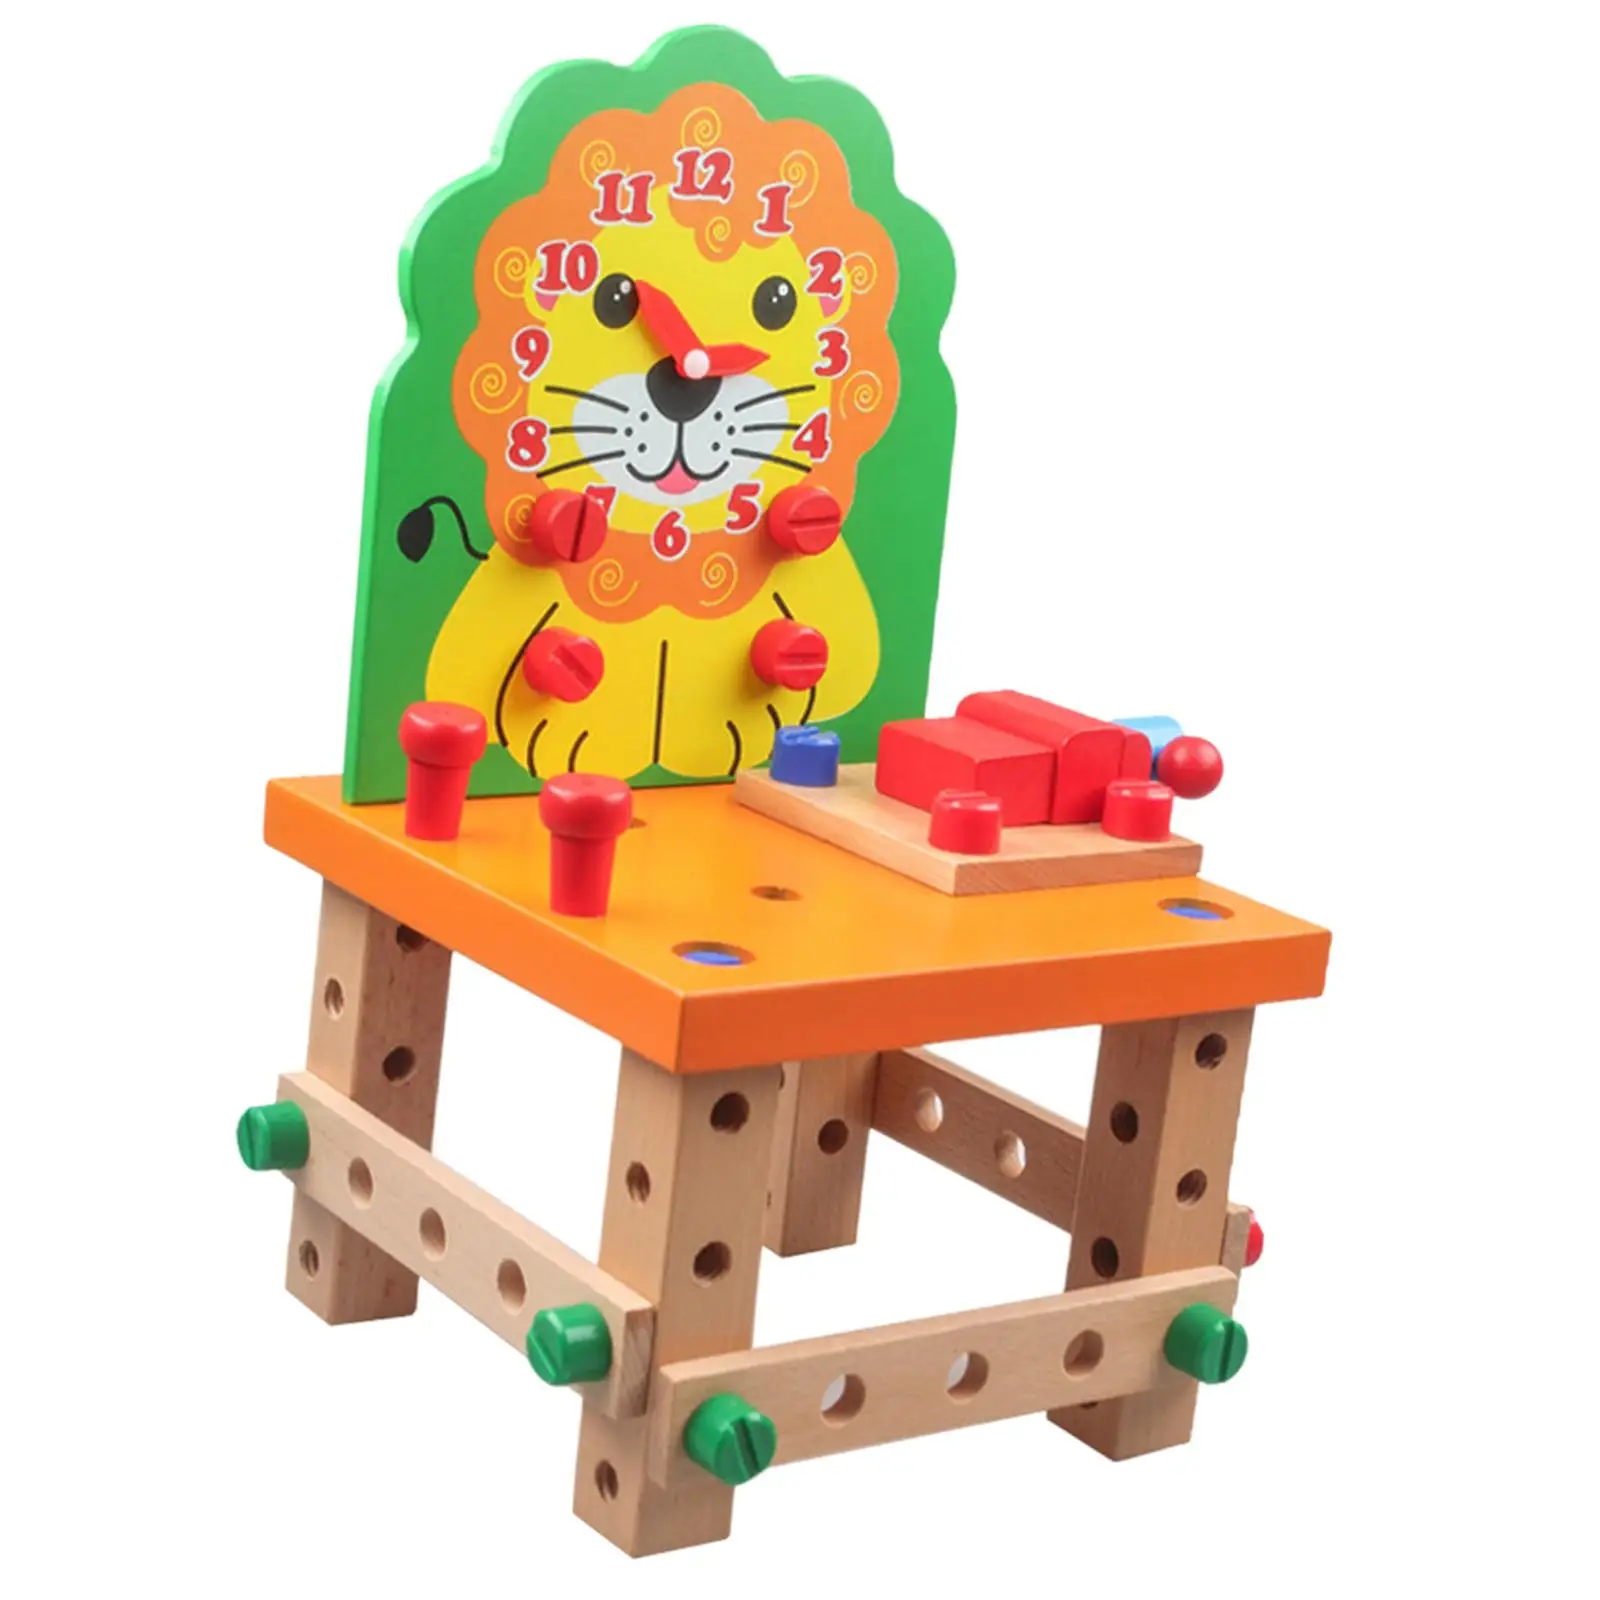 Wooden Assembling Chair Montessori Toys Educational Building Wooden Project Woodworking Kit for Girls Boys Children